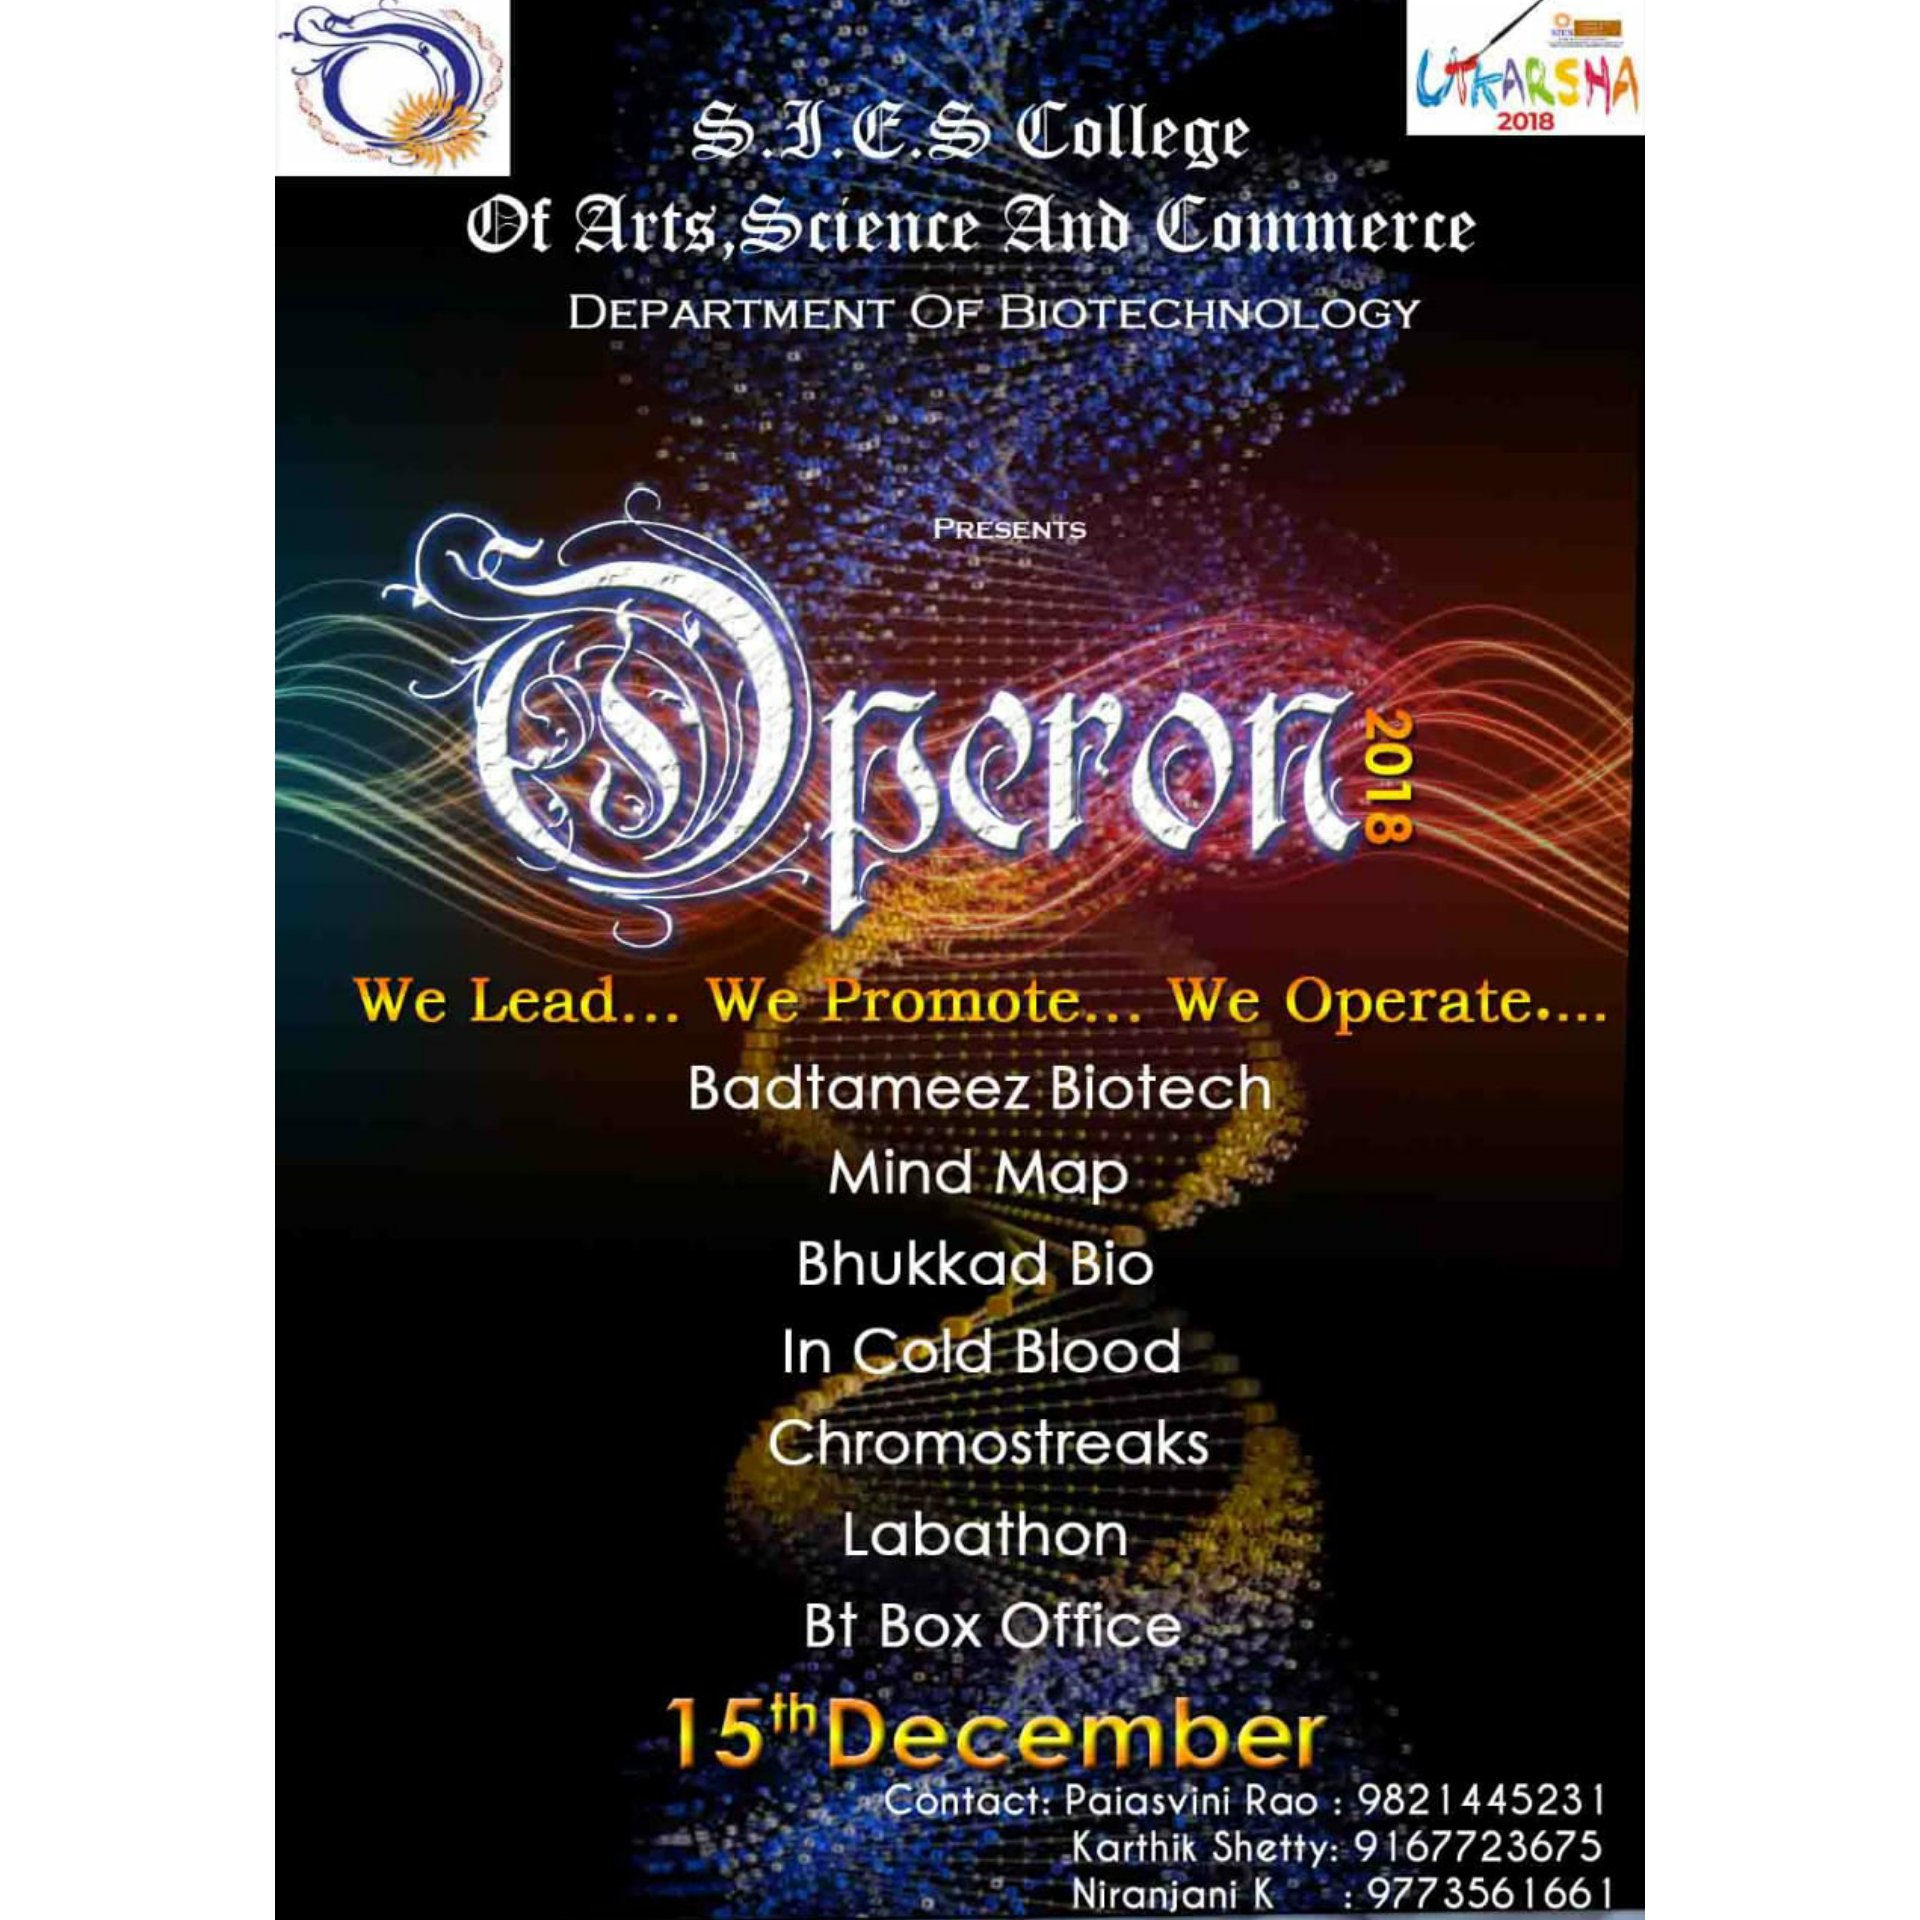 SIES college of Arts, Science and Commerce, Sion (W) Maharashtra.
Follow our pages on: 
Instagram- operon_2k18
Facebook- operon2k18